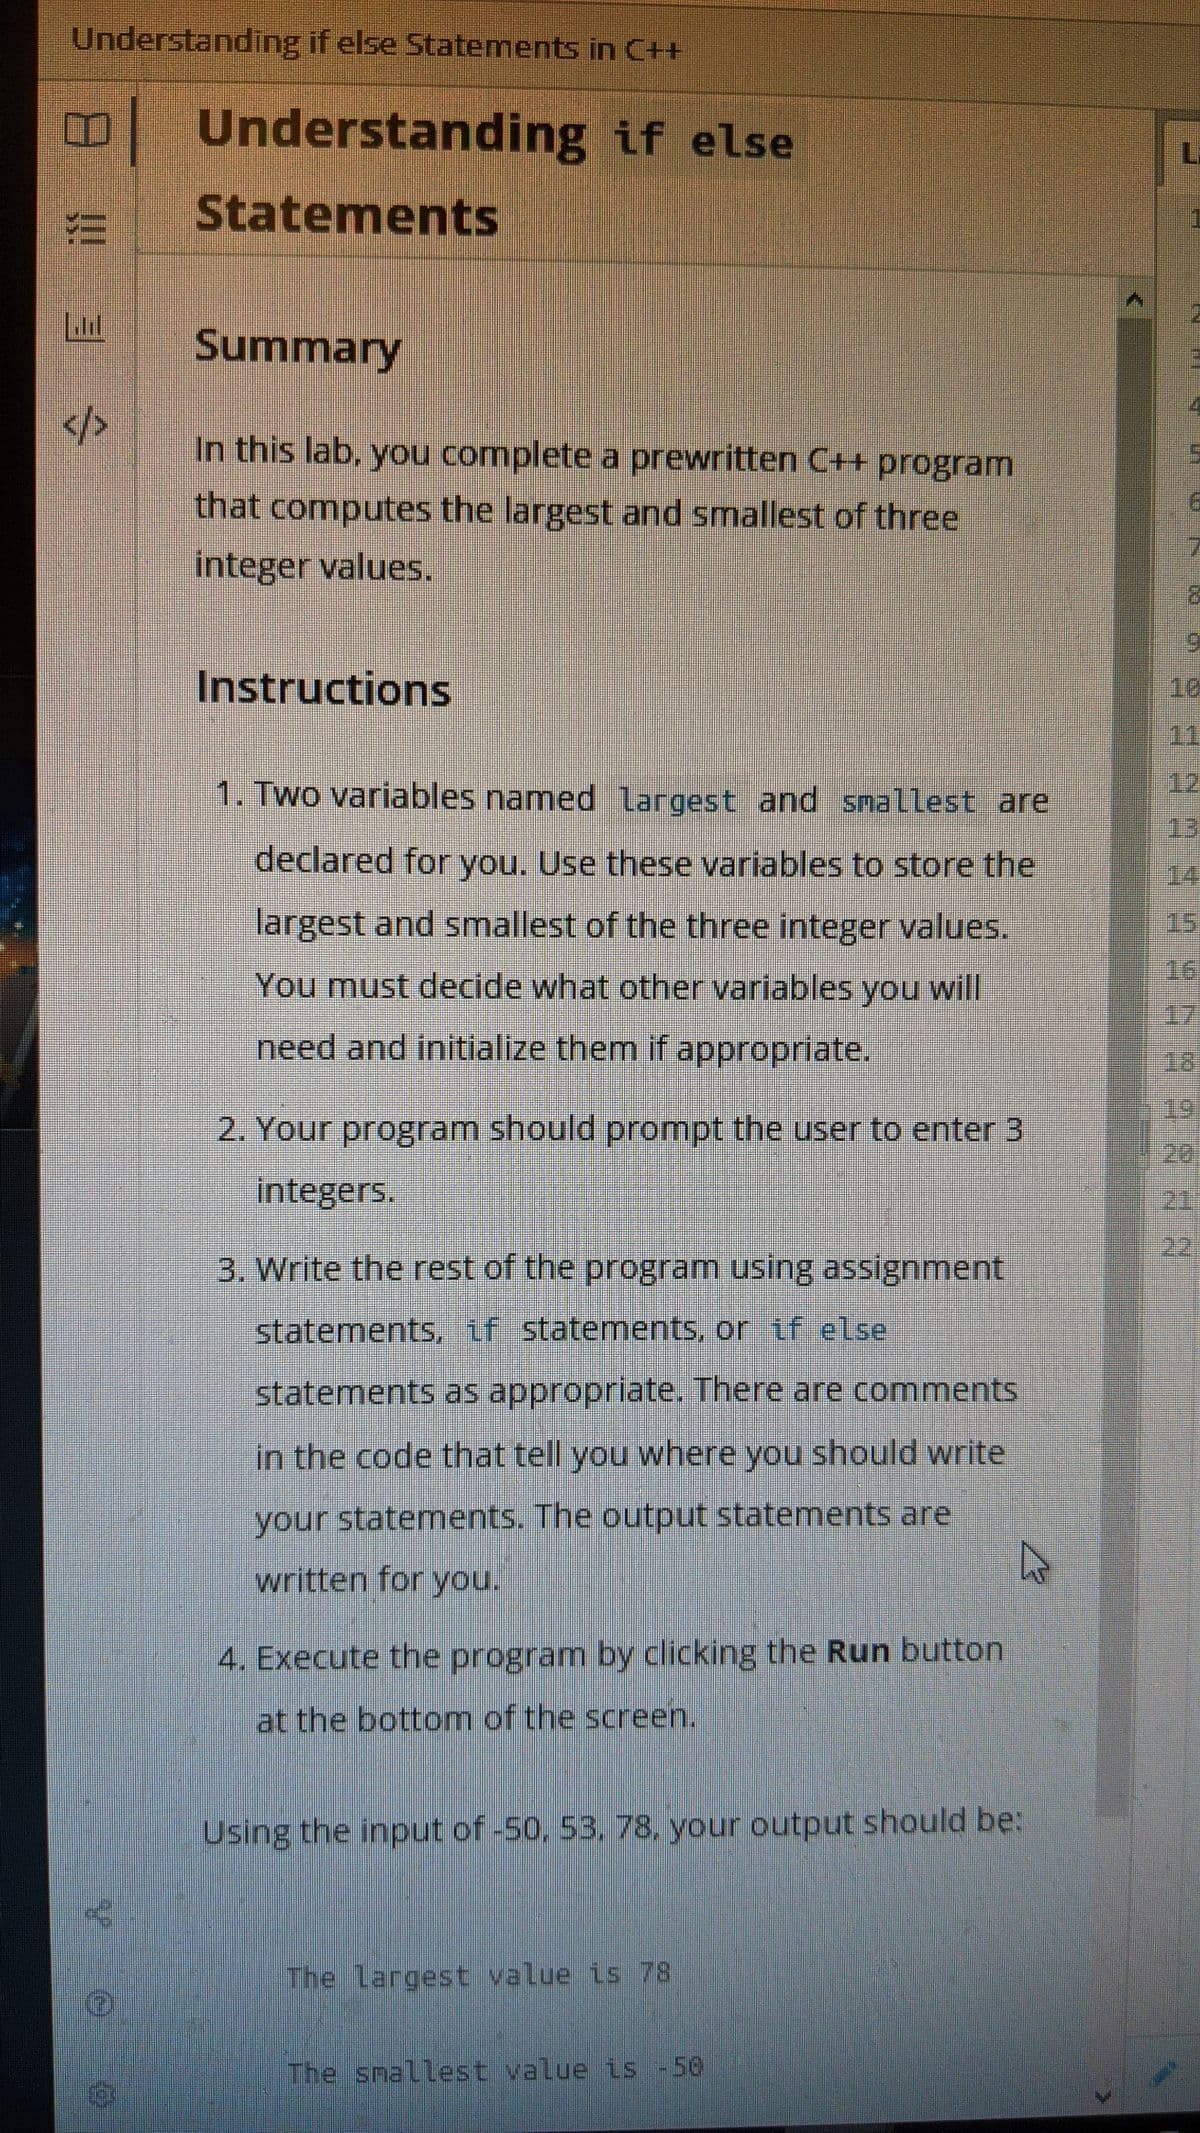 Understanding if else Statements in C++
B Understanding if else
Statements
Ll
Summary
14
</>
In this lab, you complete a prewritten C++ program
that computes the largest and smallest of three
integer values.
Instructions
10
11
1. Two variables named largest and smallest are
12
13
declared for you. Use these variables to store the
14
largest and smallest of the three integer values.
15
16
You must decide what other variables you will
17
need and initialize them if appropriate.
18
19
2. Your program should prompt the user to enter 3
20
integers.
21
22
3. Write the rest of the program using assignment
statements, if statements, or if else
statements as appropriate. There are comments
in the code that tell you where you should write
your statements. The output statements are
written for you.
4. Execute the program by clicking the Run button
at the bottom of the screen.
Using the input of -50, 53, 78. your output should be:
The largest value is 78
The snallest value is -50
!!
